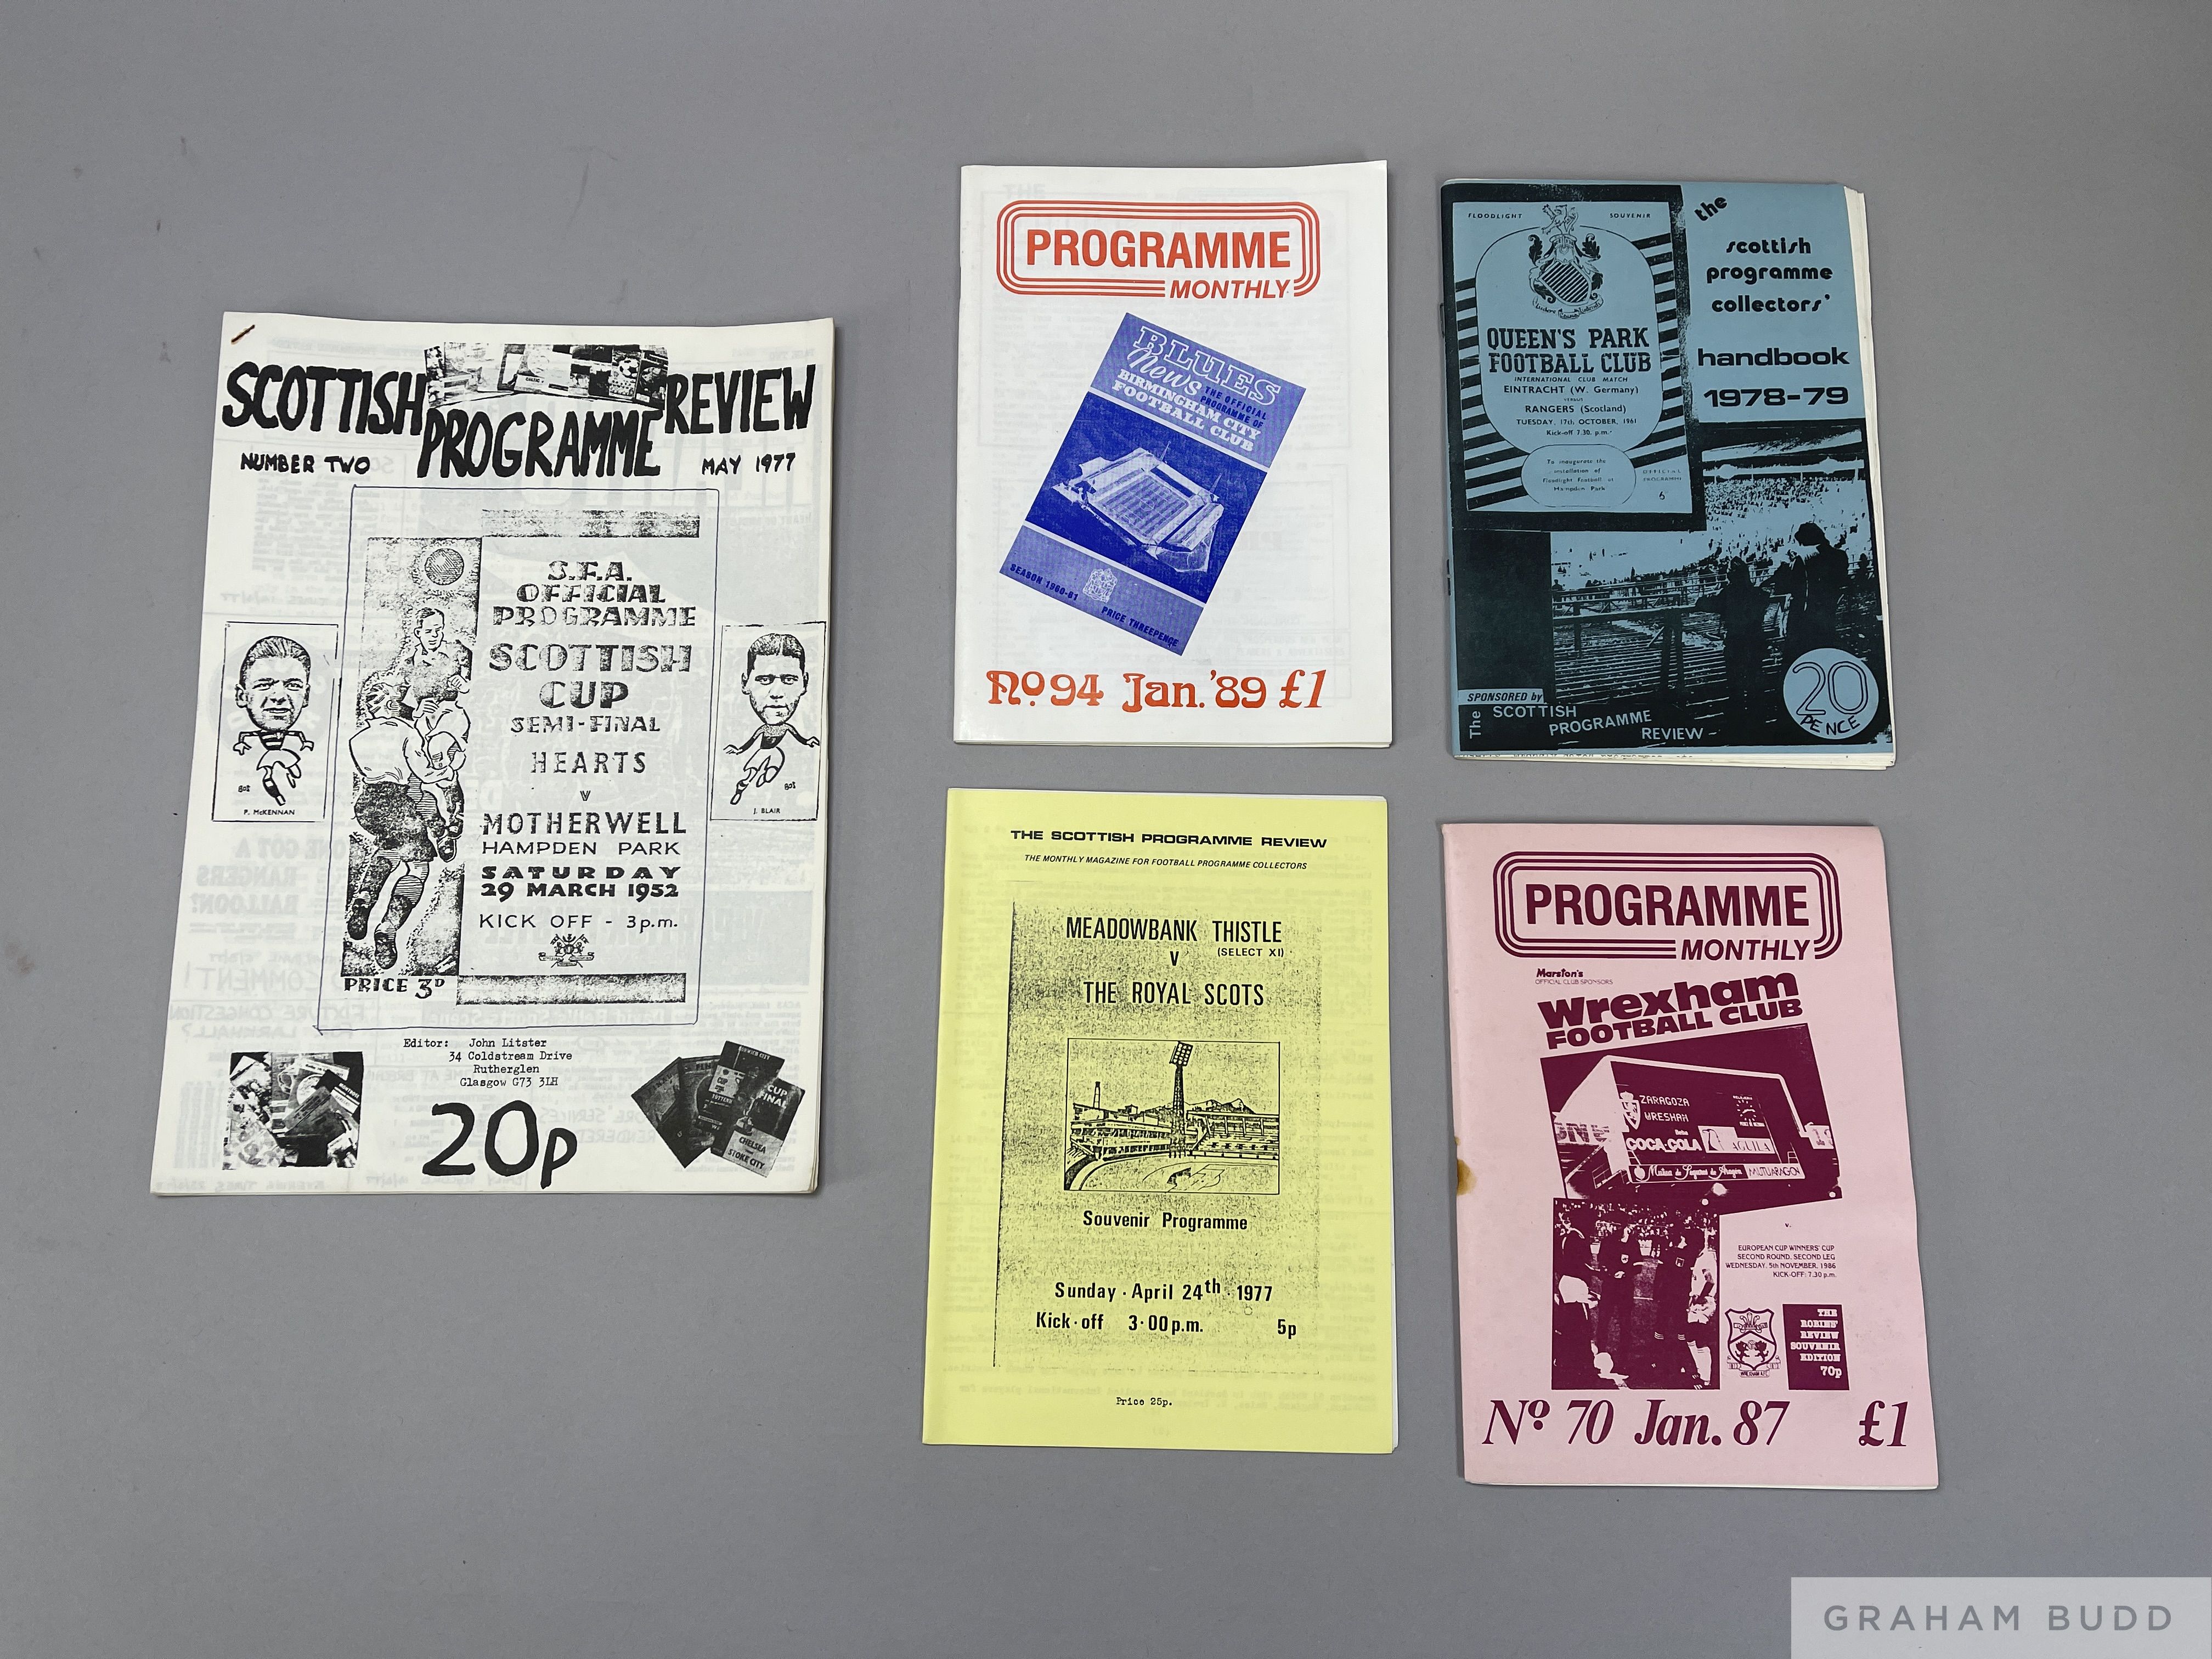 Programmes, Collectors publications, Programme Monthly, circa 1980s